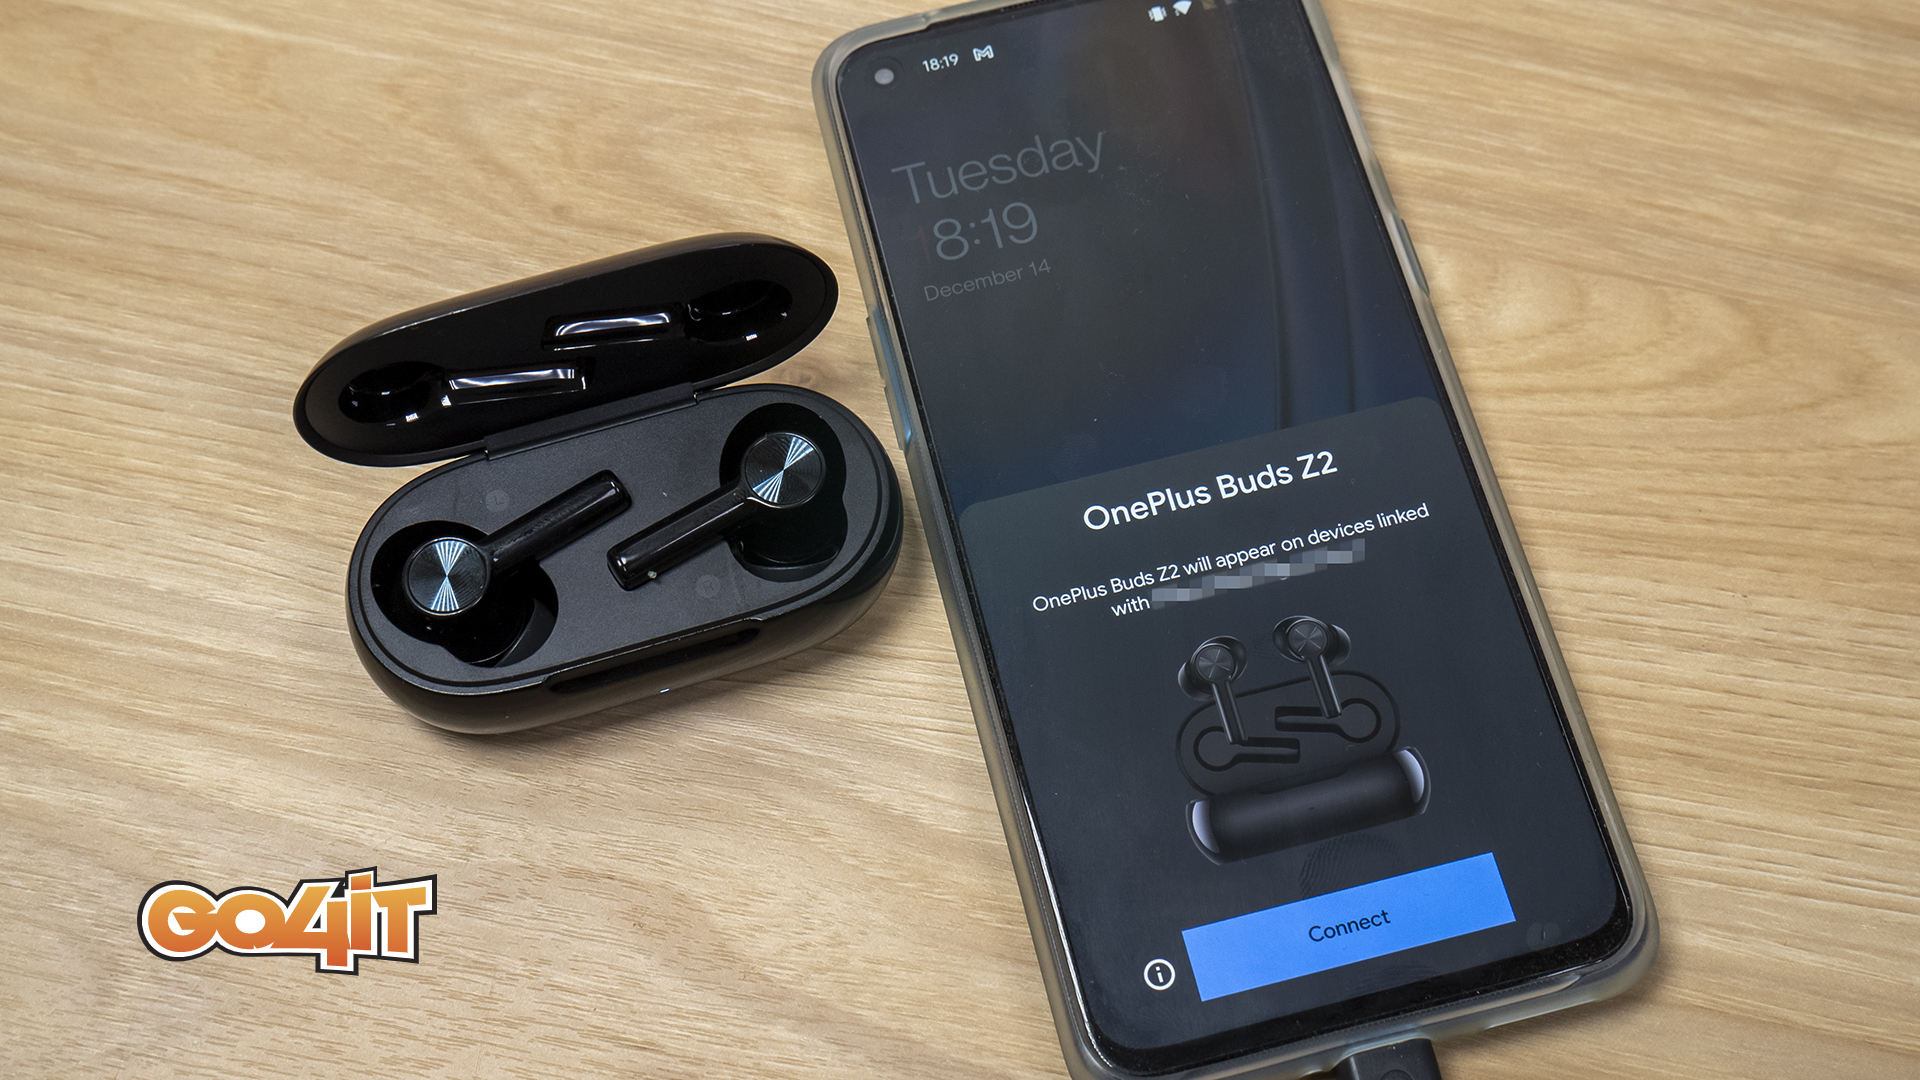 OnePlus Buds Z2 connect